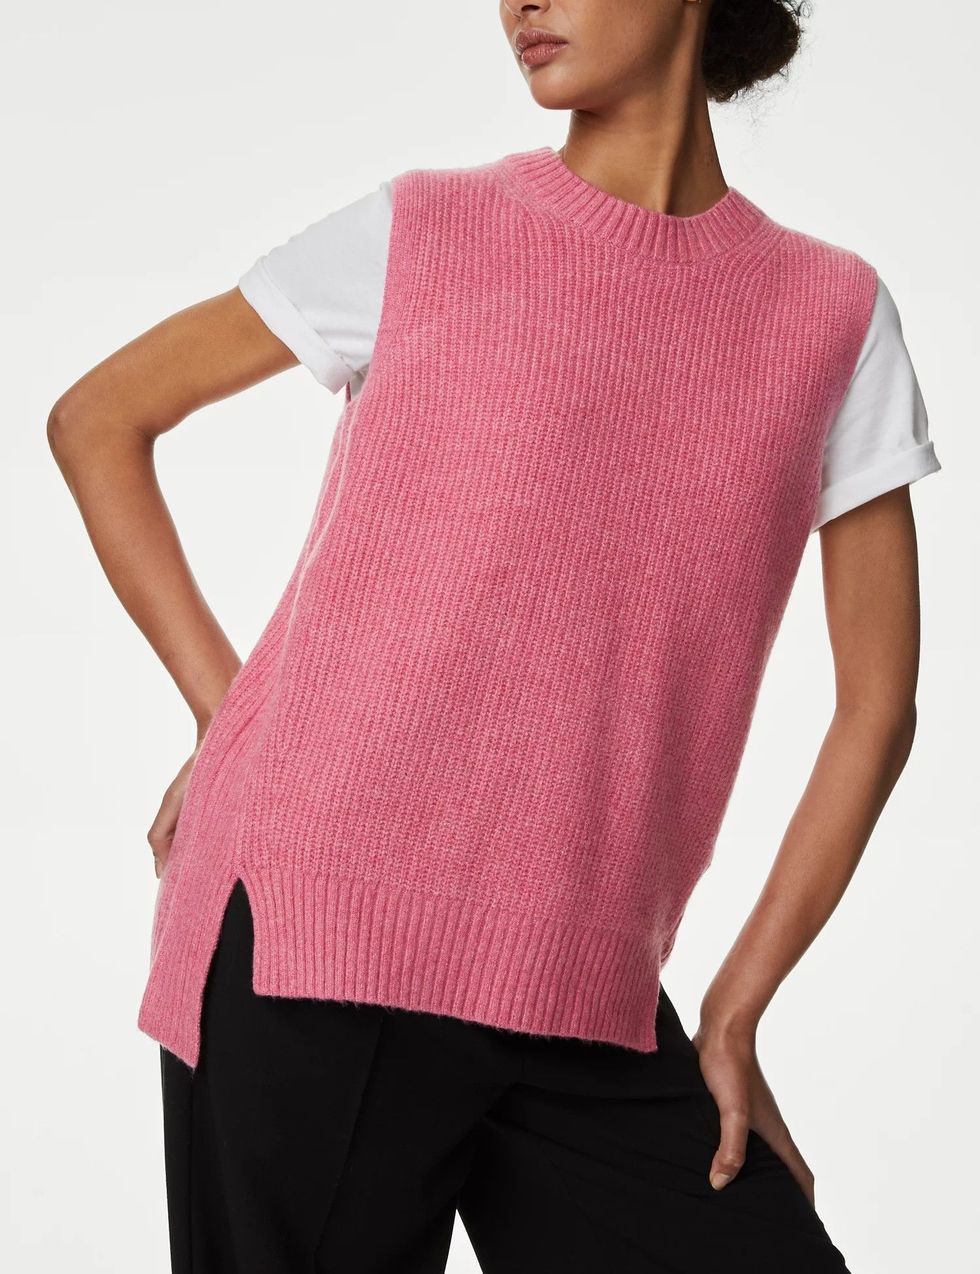 Two ways to wear a knitted tank top (sweater vest) — That's Not My Age